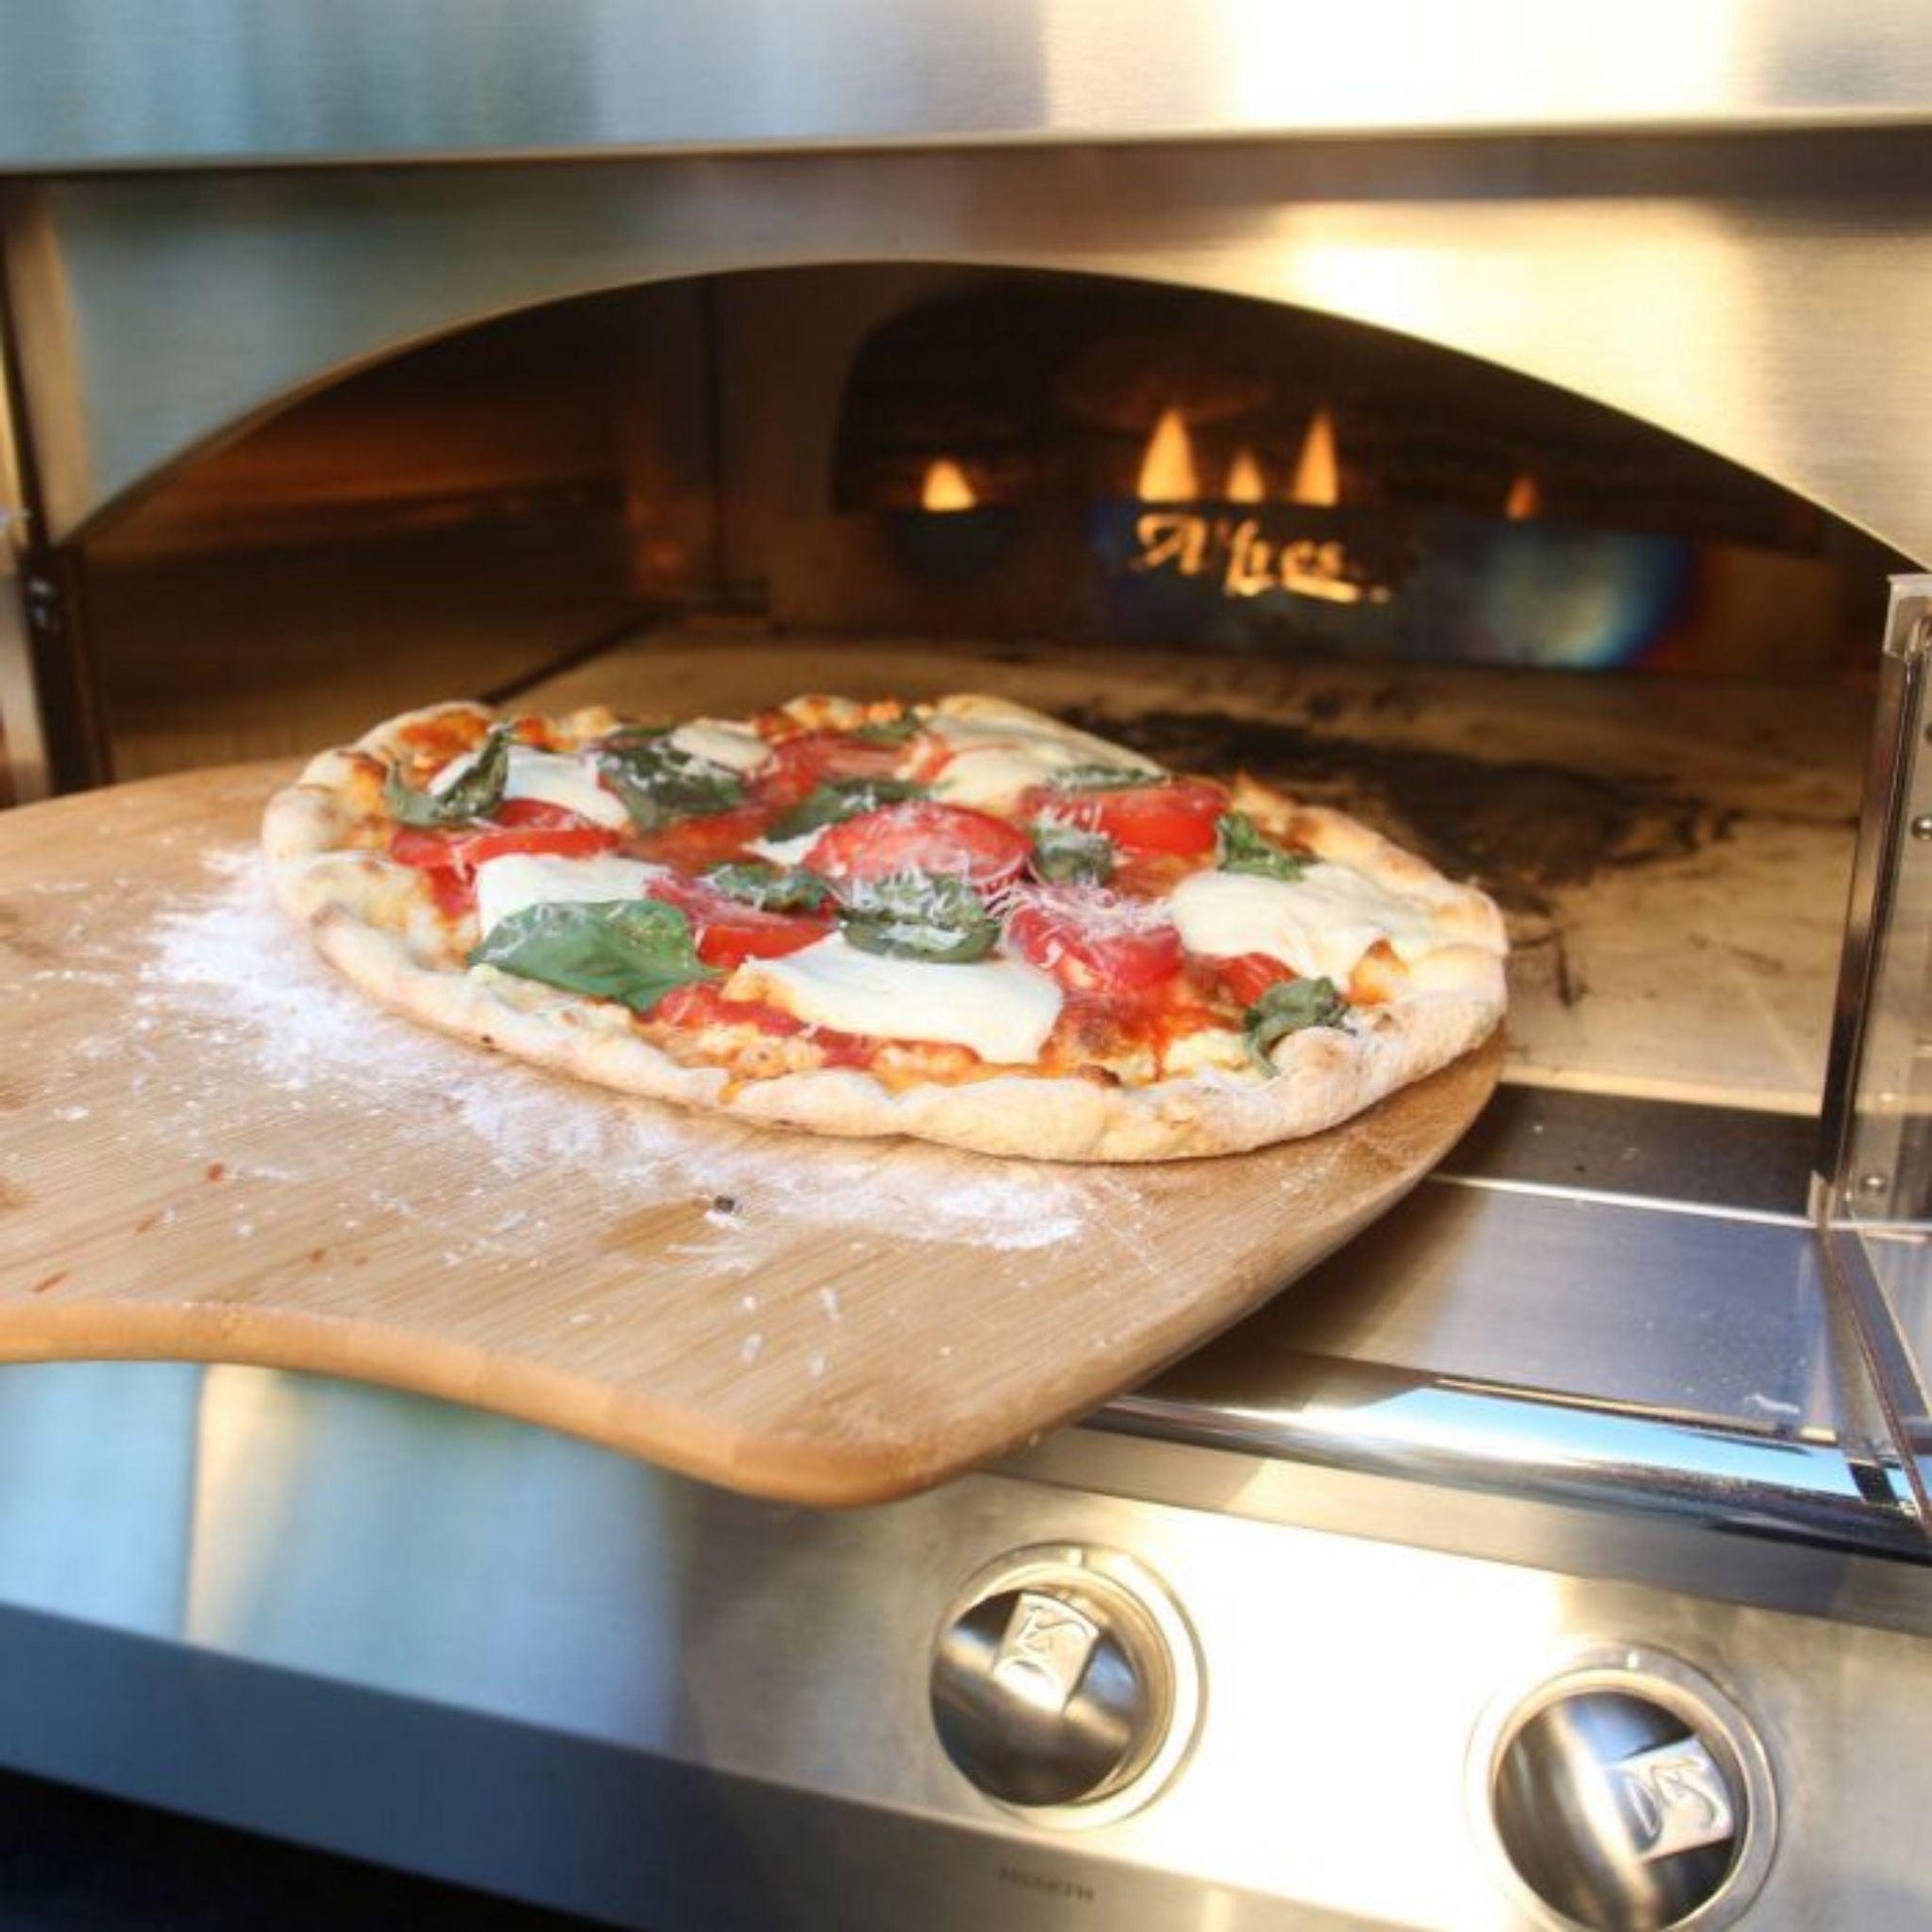 Alfresco 30" Signal White Gloss Natural Gas Pizza Oven for Built-in Installations